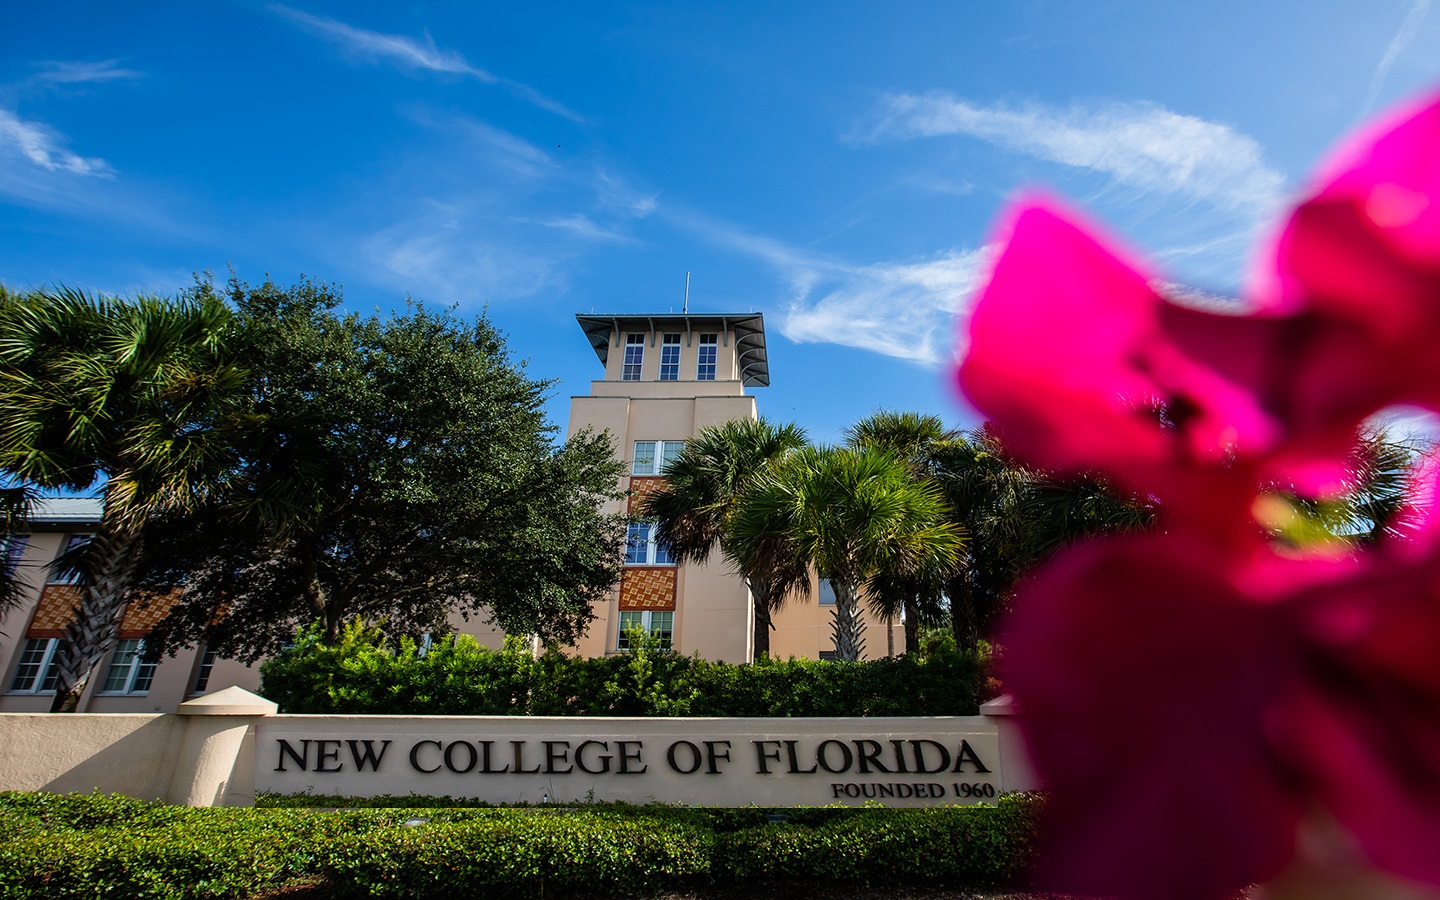 New College of Florida's Controversial Move The Decision to Drop Gender Studies Program